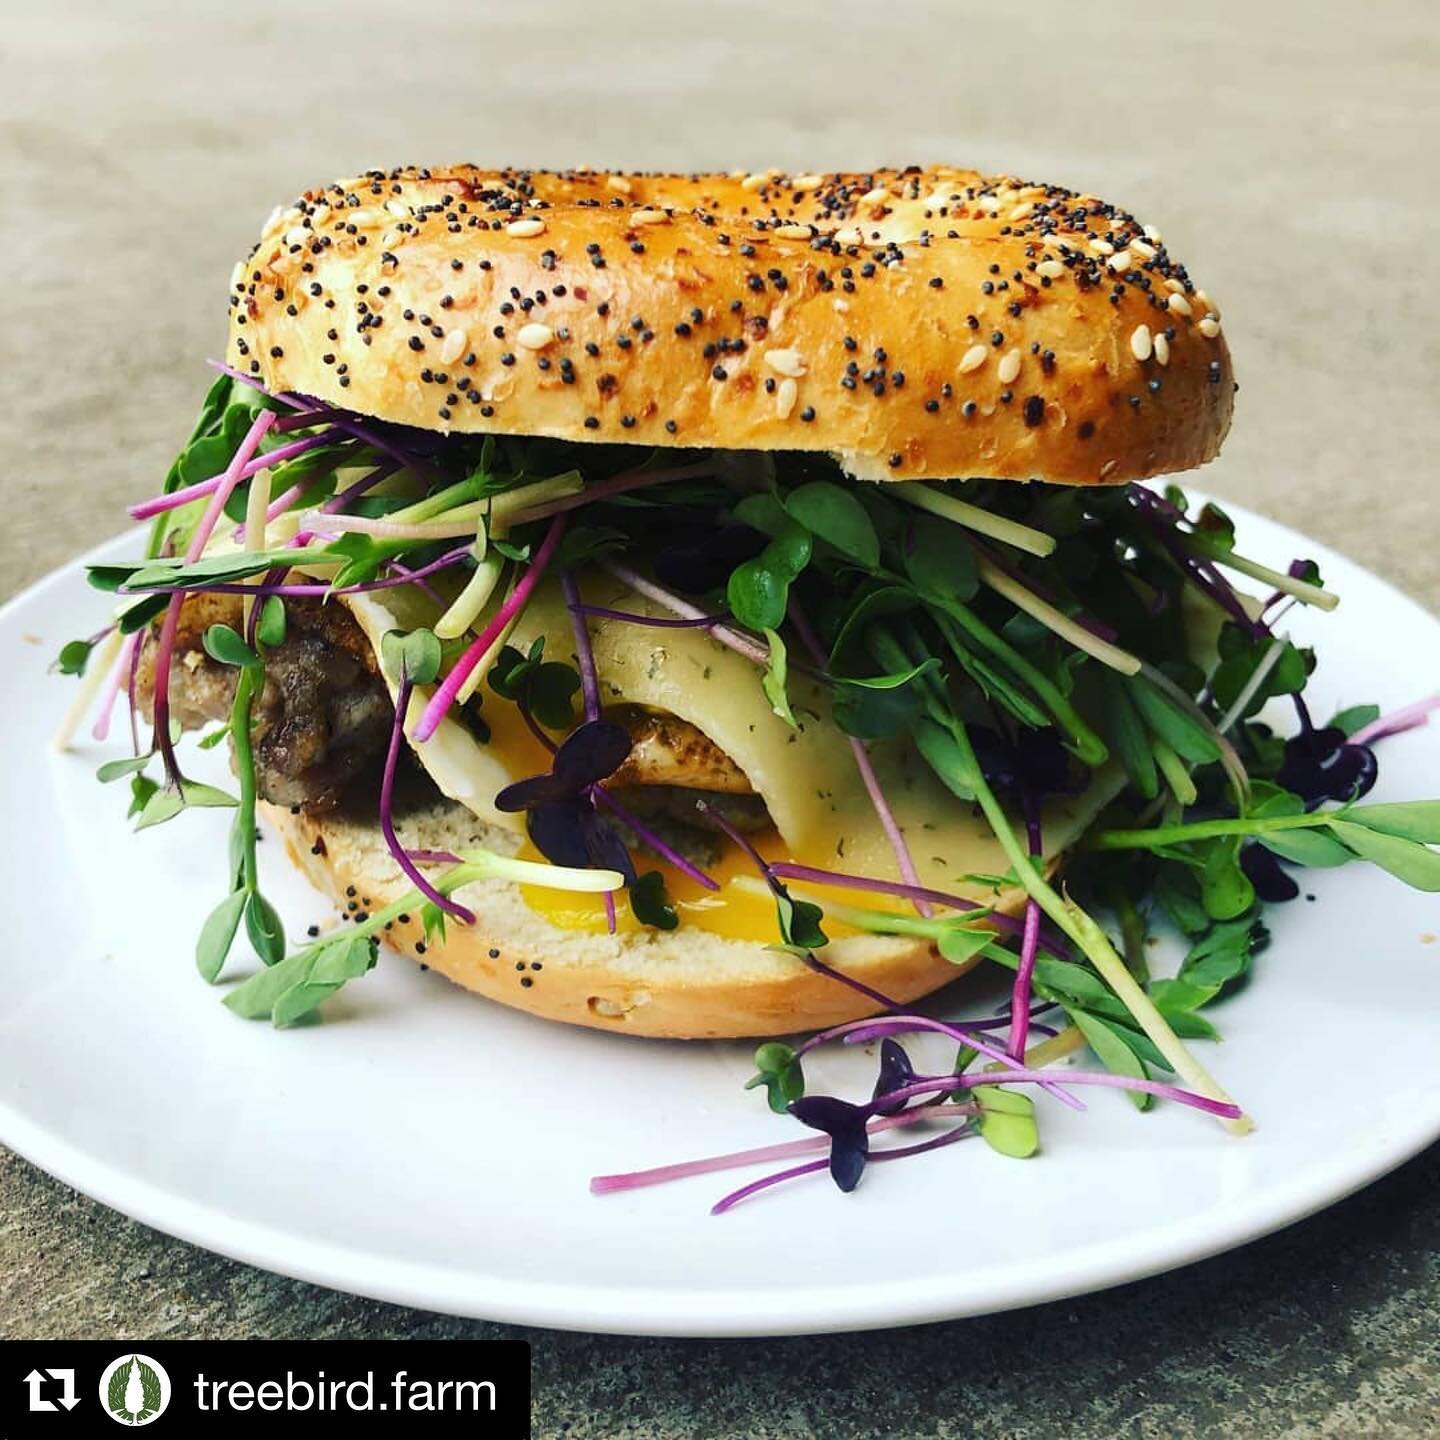 Reposted from @treebird.farm 
In an effort to better serve our community during these times, we are partnering with @columbiamushroom  and @windriverorganics  @mlj_dairy  @dairy.charisway  to provide a wider selection of products for home delivery st